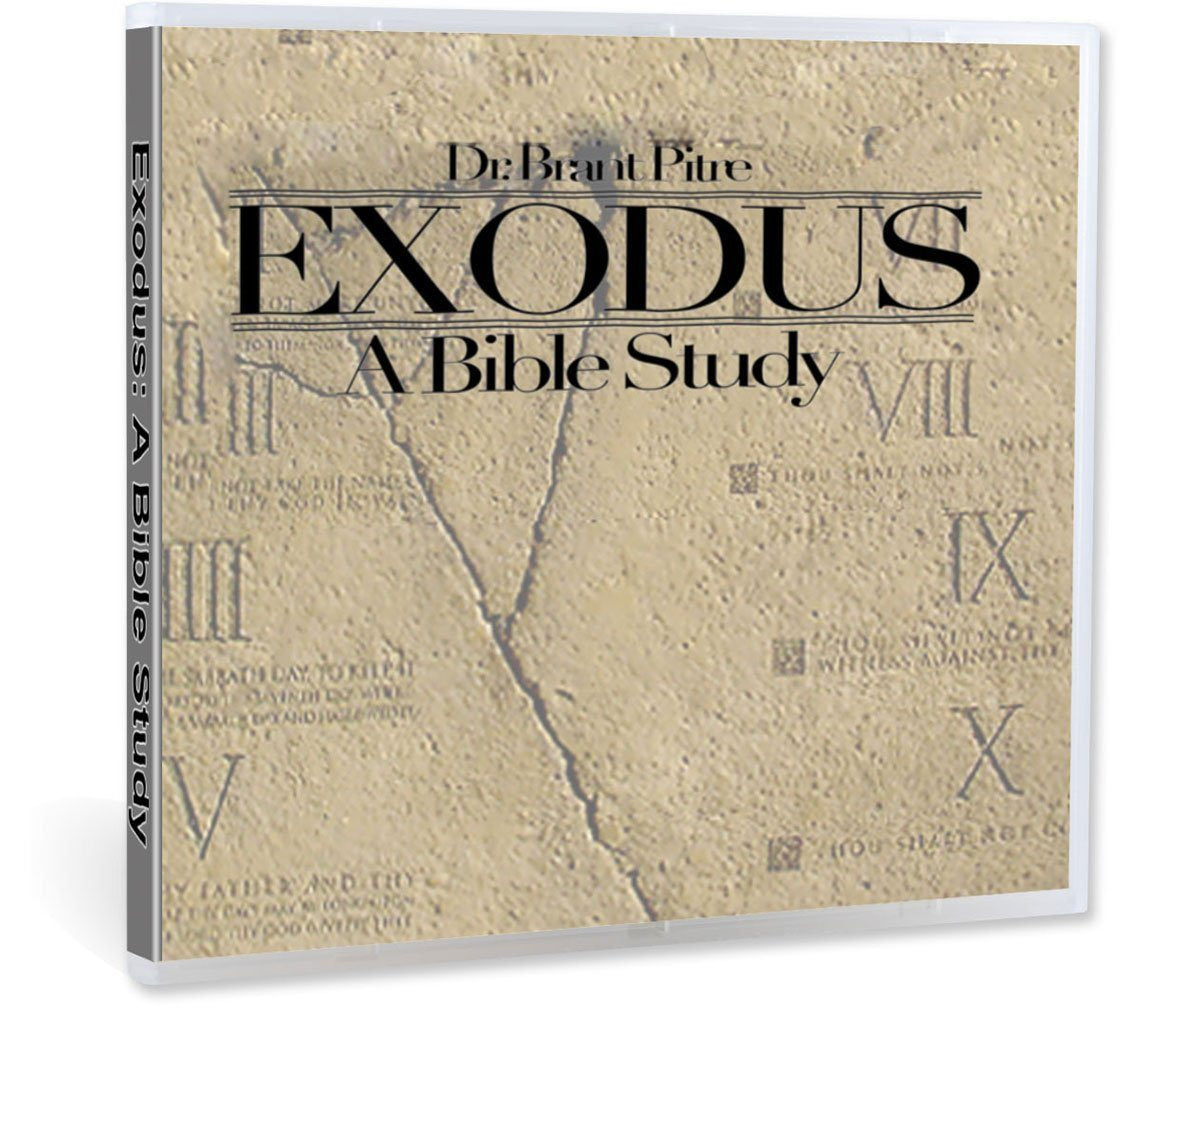 A Catholic Bible study on the Book of Exodus with Dr. Brant Pitre CD